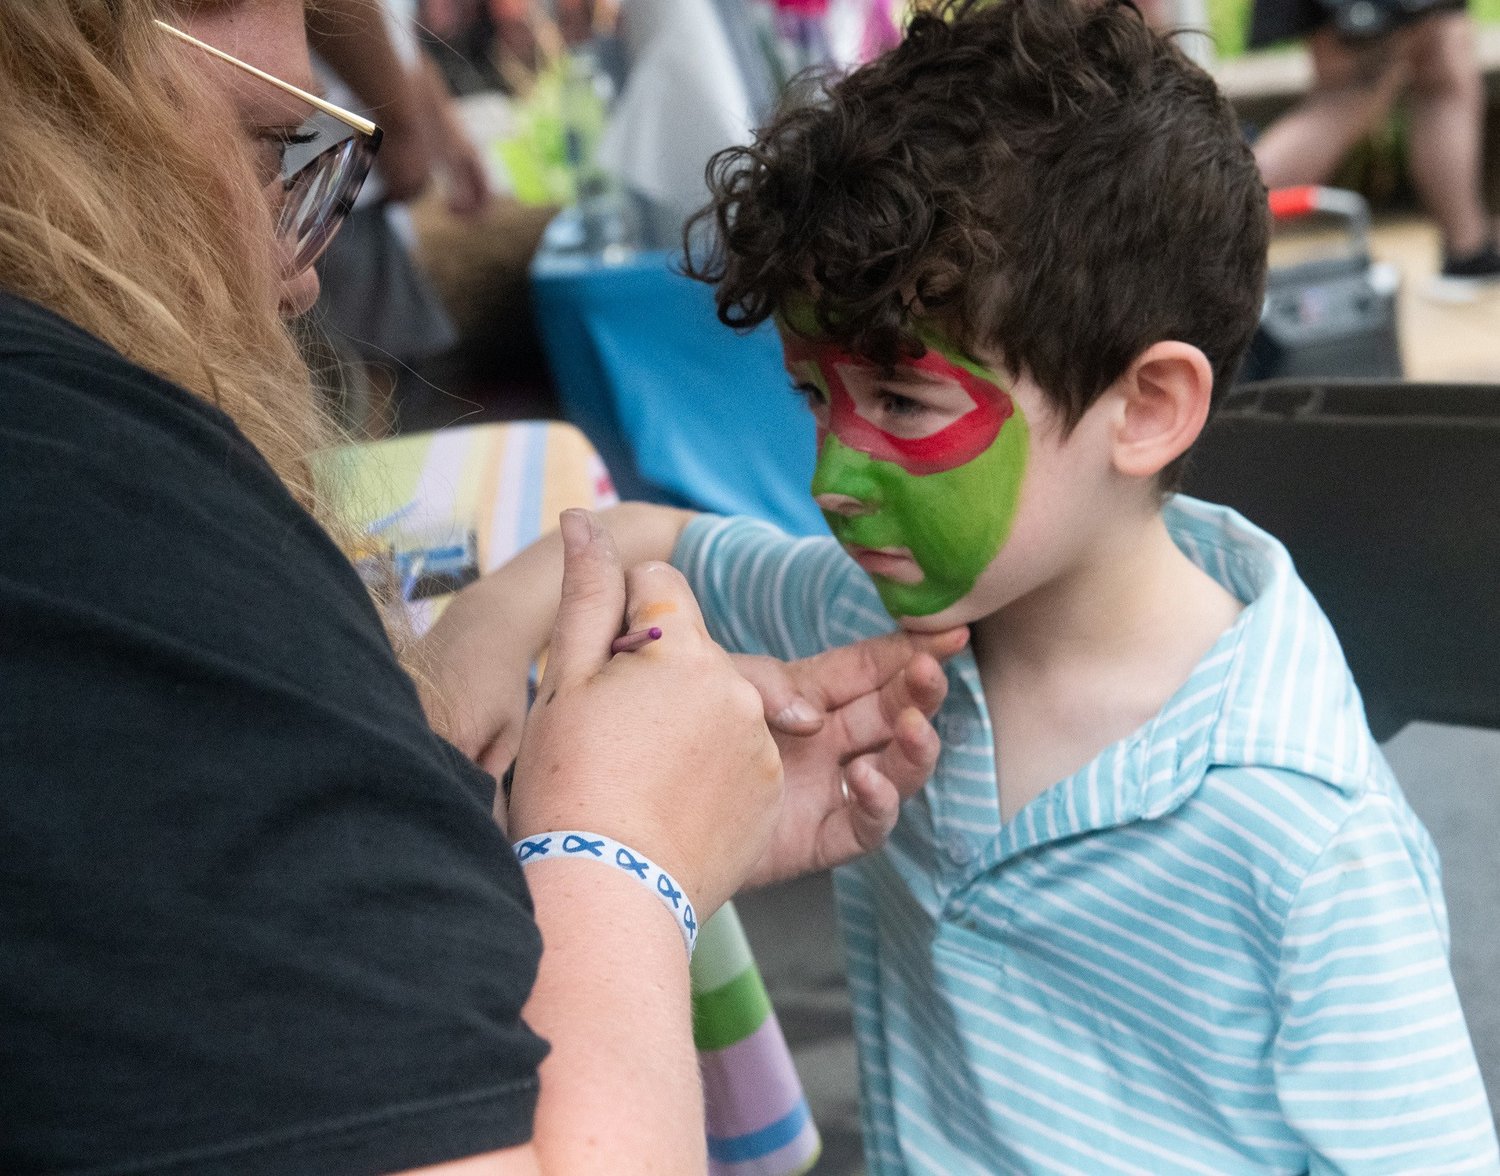 Tommy Hermand, 5, of Doylestown gets his face painted.